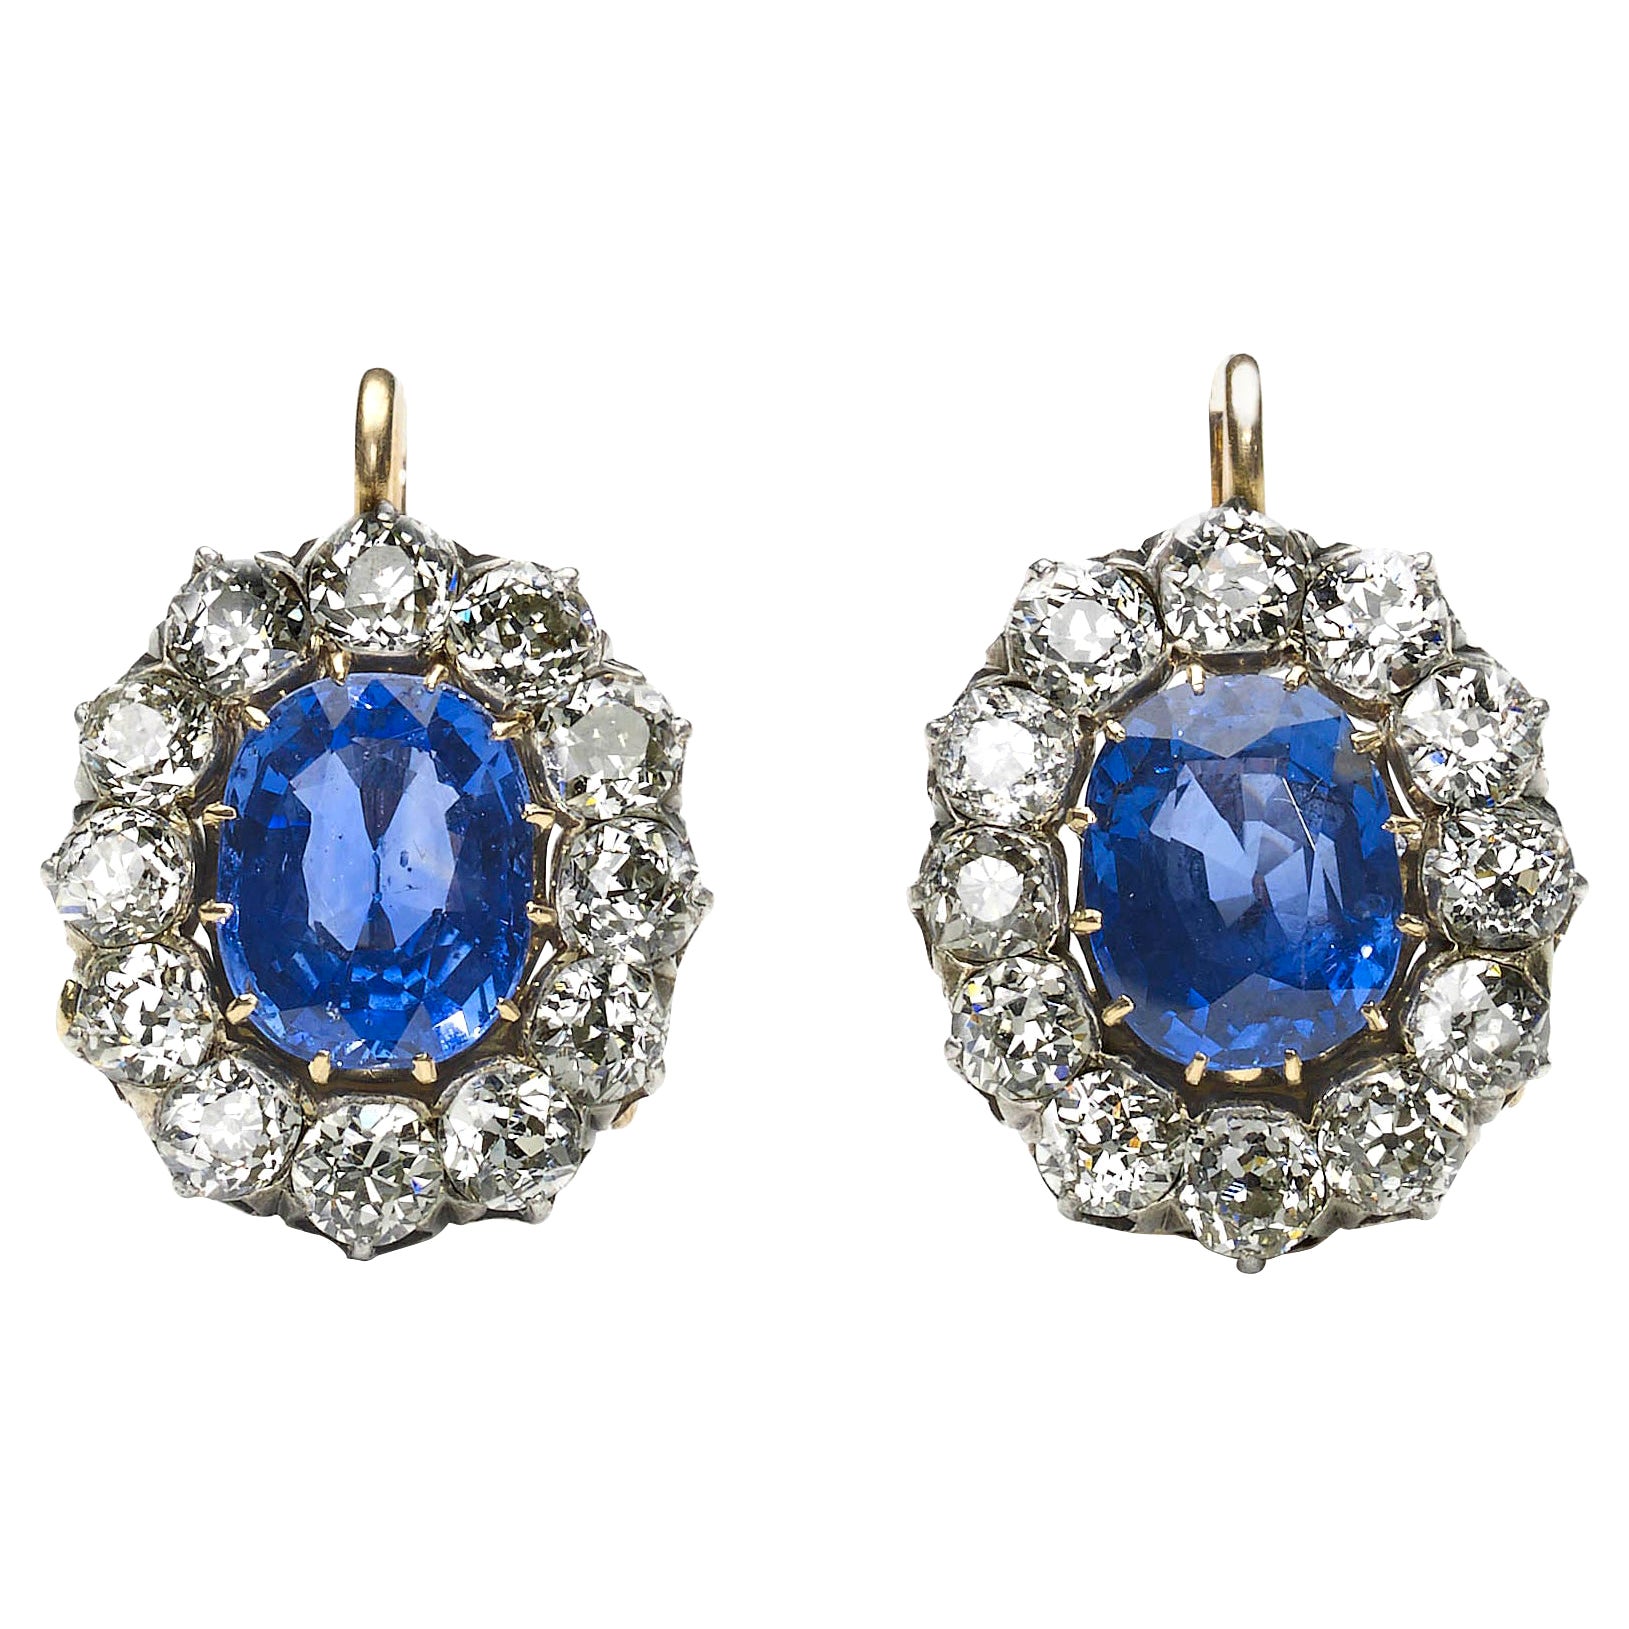 Sapphire And Diamond Cluster Earrings, Platinum And Gold, Circa 1890 For Sale